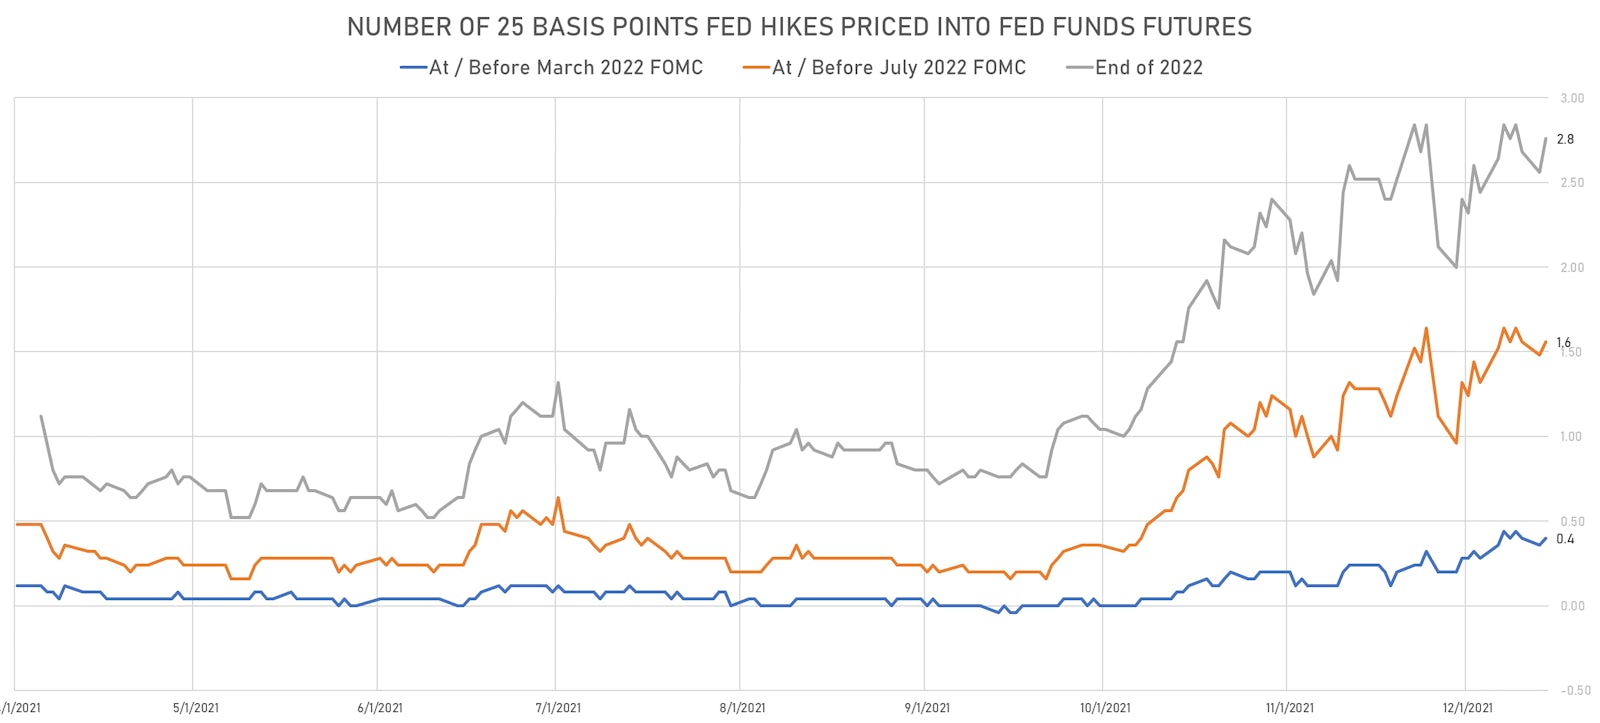 Implied Fed Hikes Derived From Fed Funds Futures | Sources: ϕpost, Refinitiv data